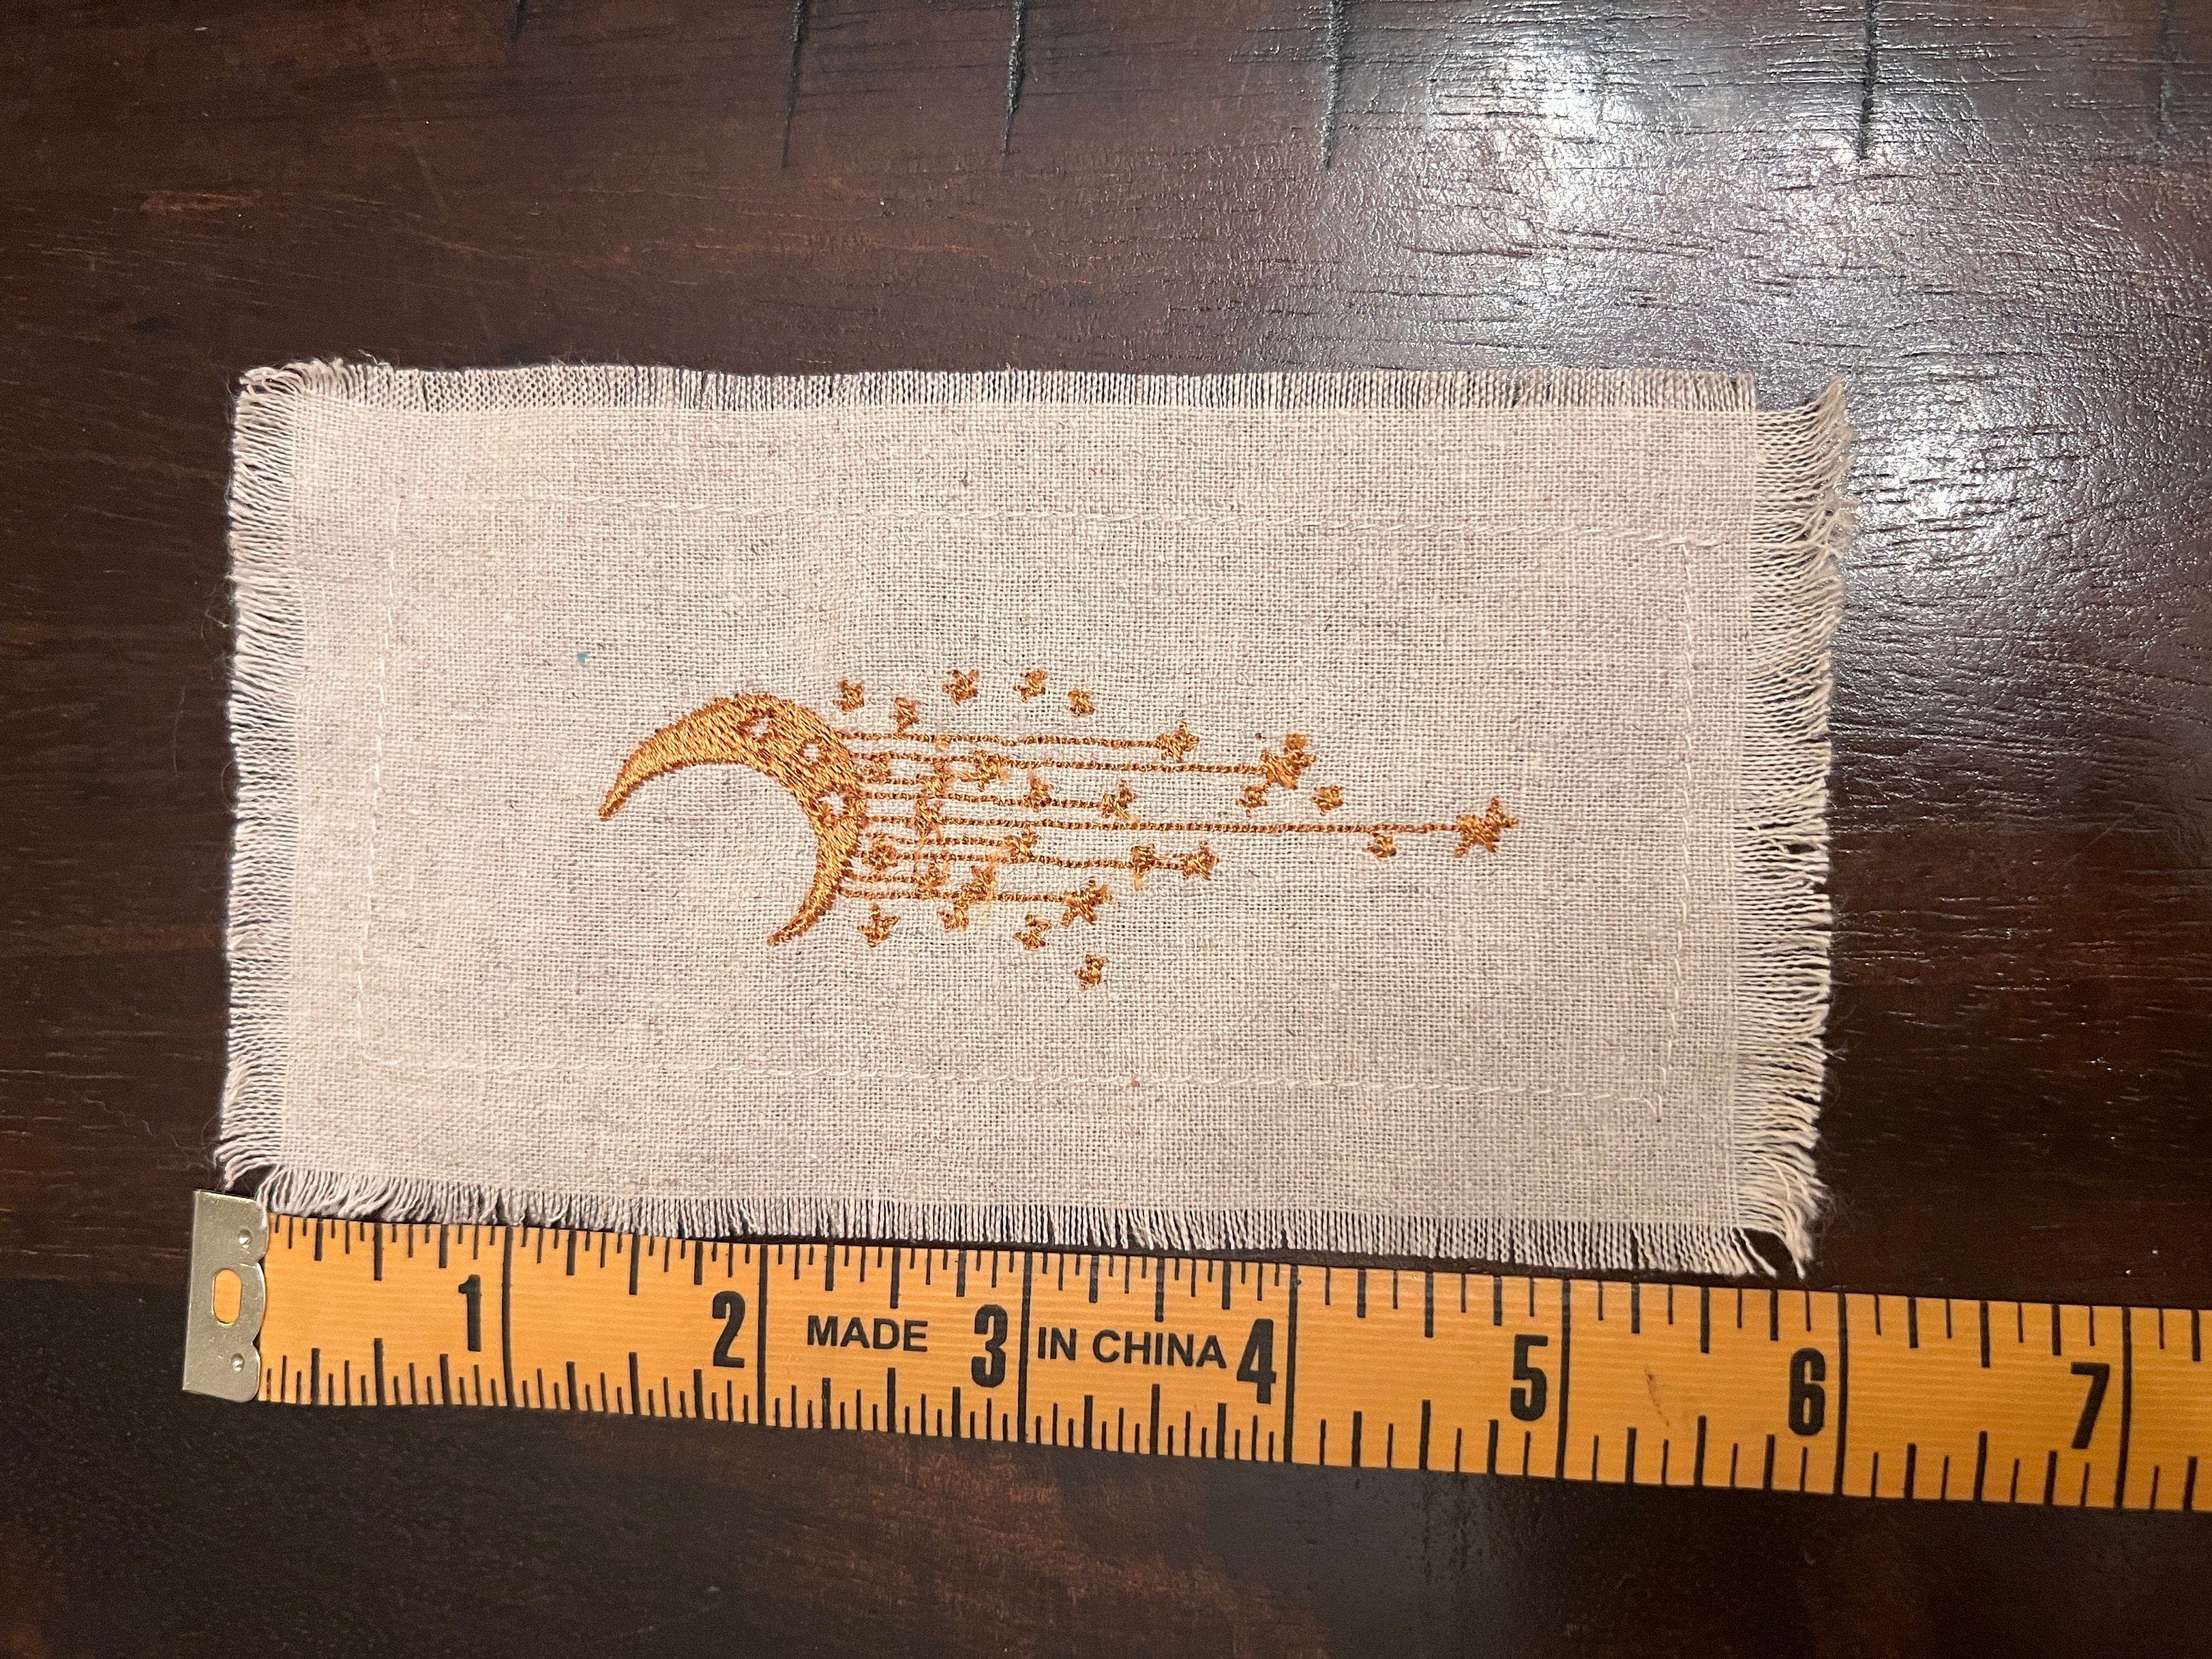 MOON JEWELS Golden Moon STARS beige Linen Patch 6x3 frayed edges sew on Decal Iron Moons shabby chic magnolia pearl Boho patches embroidery Appliques & Patches